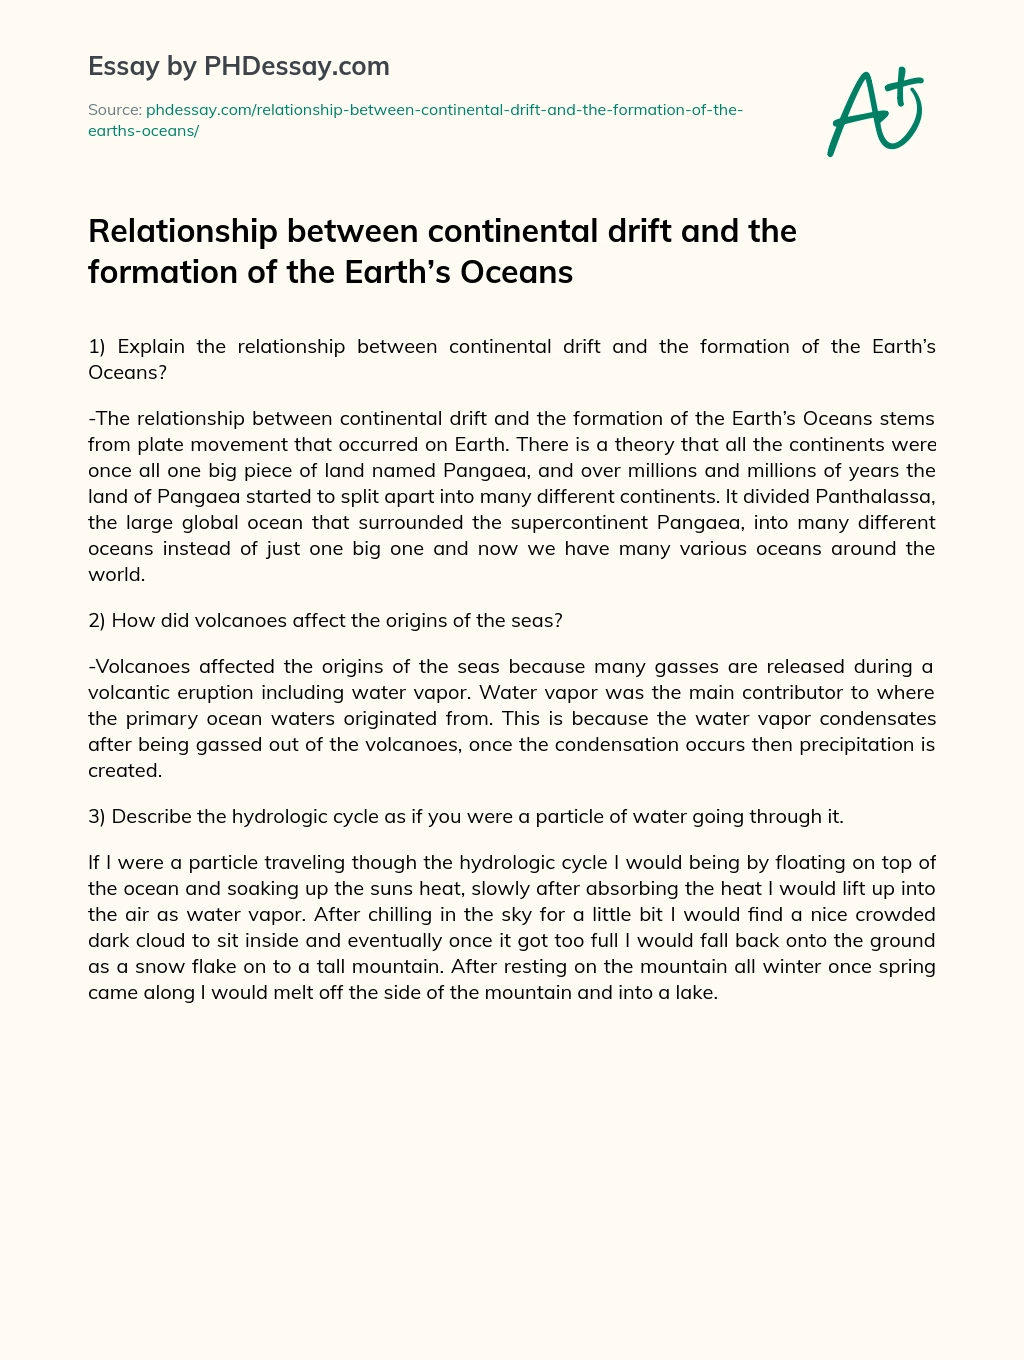 Relationship between continental drift and the formation of the Earth’s Oceans essay